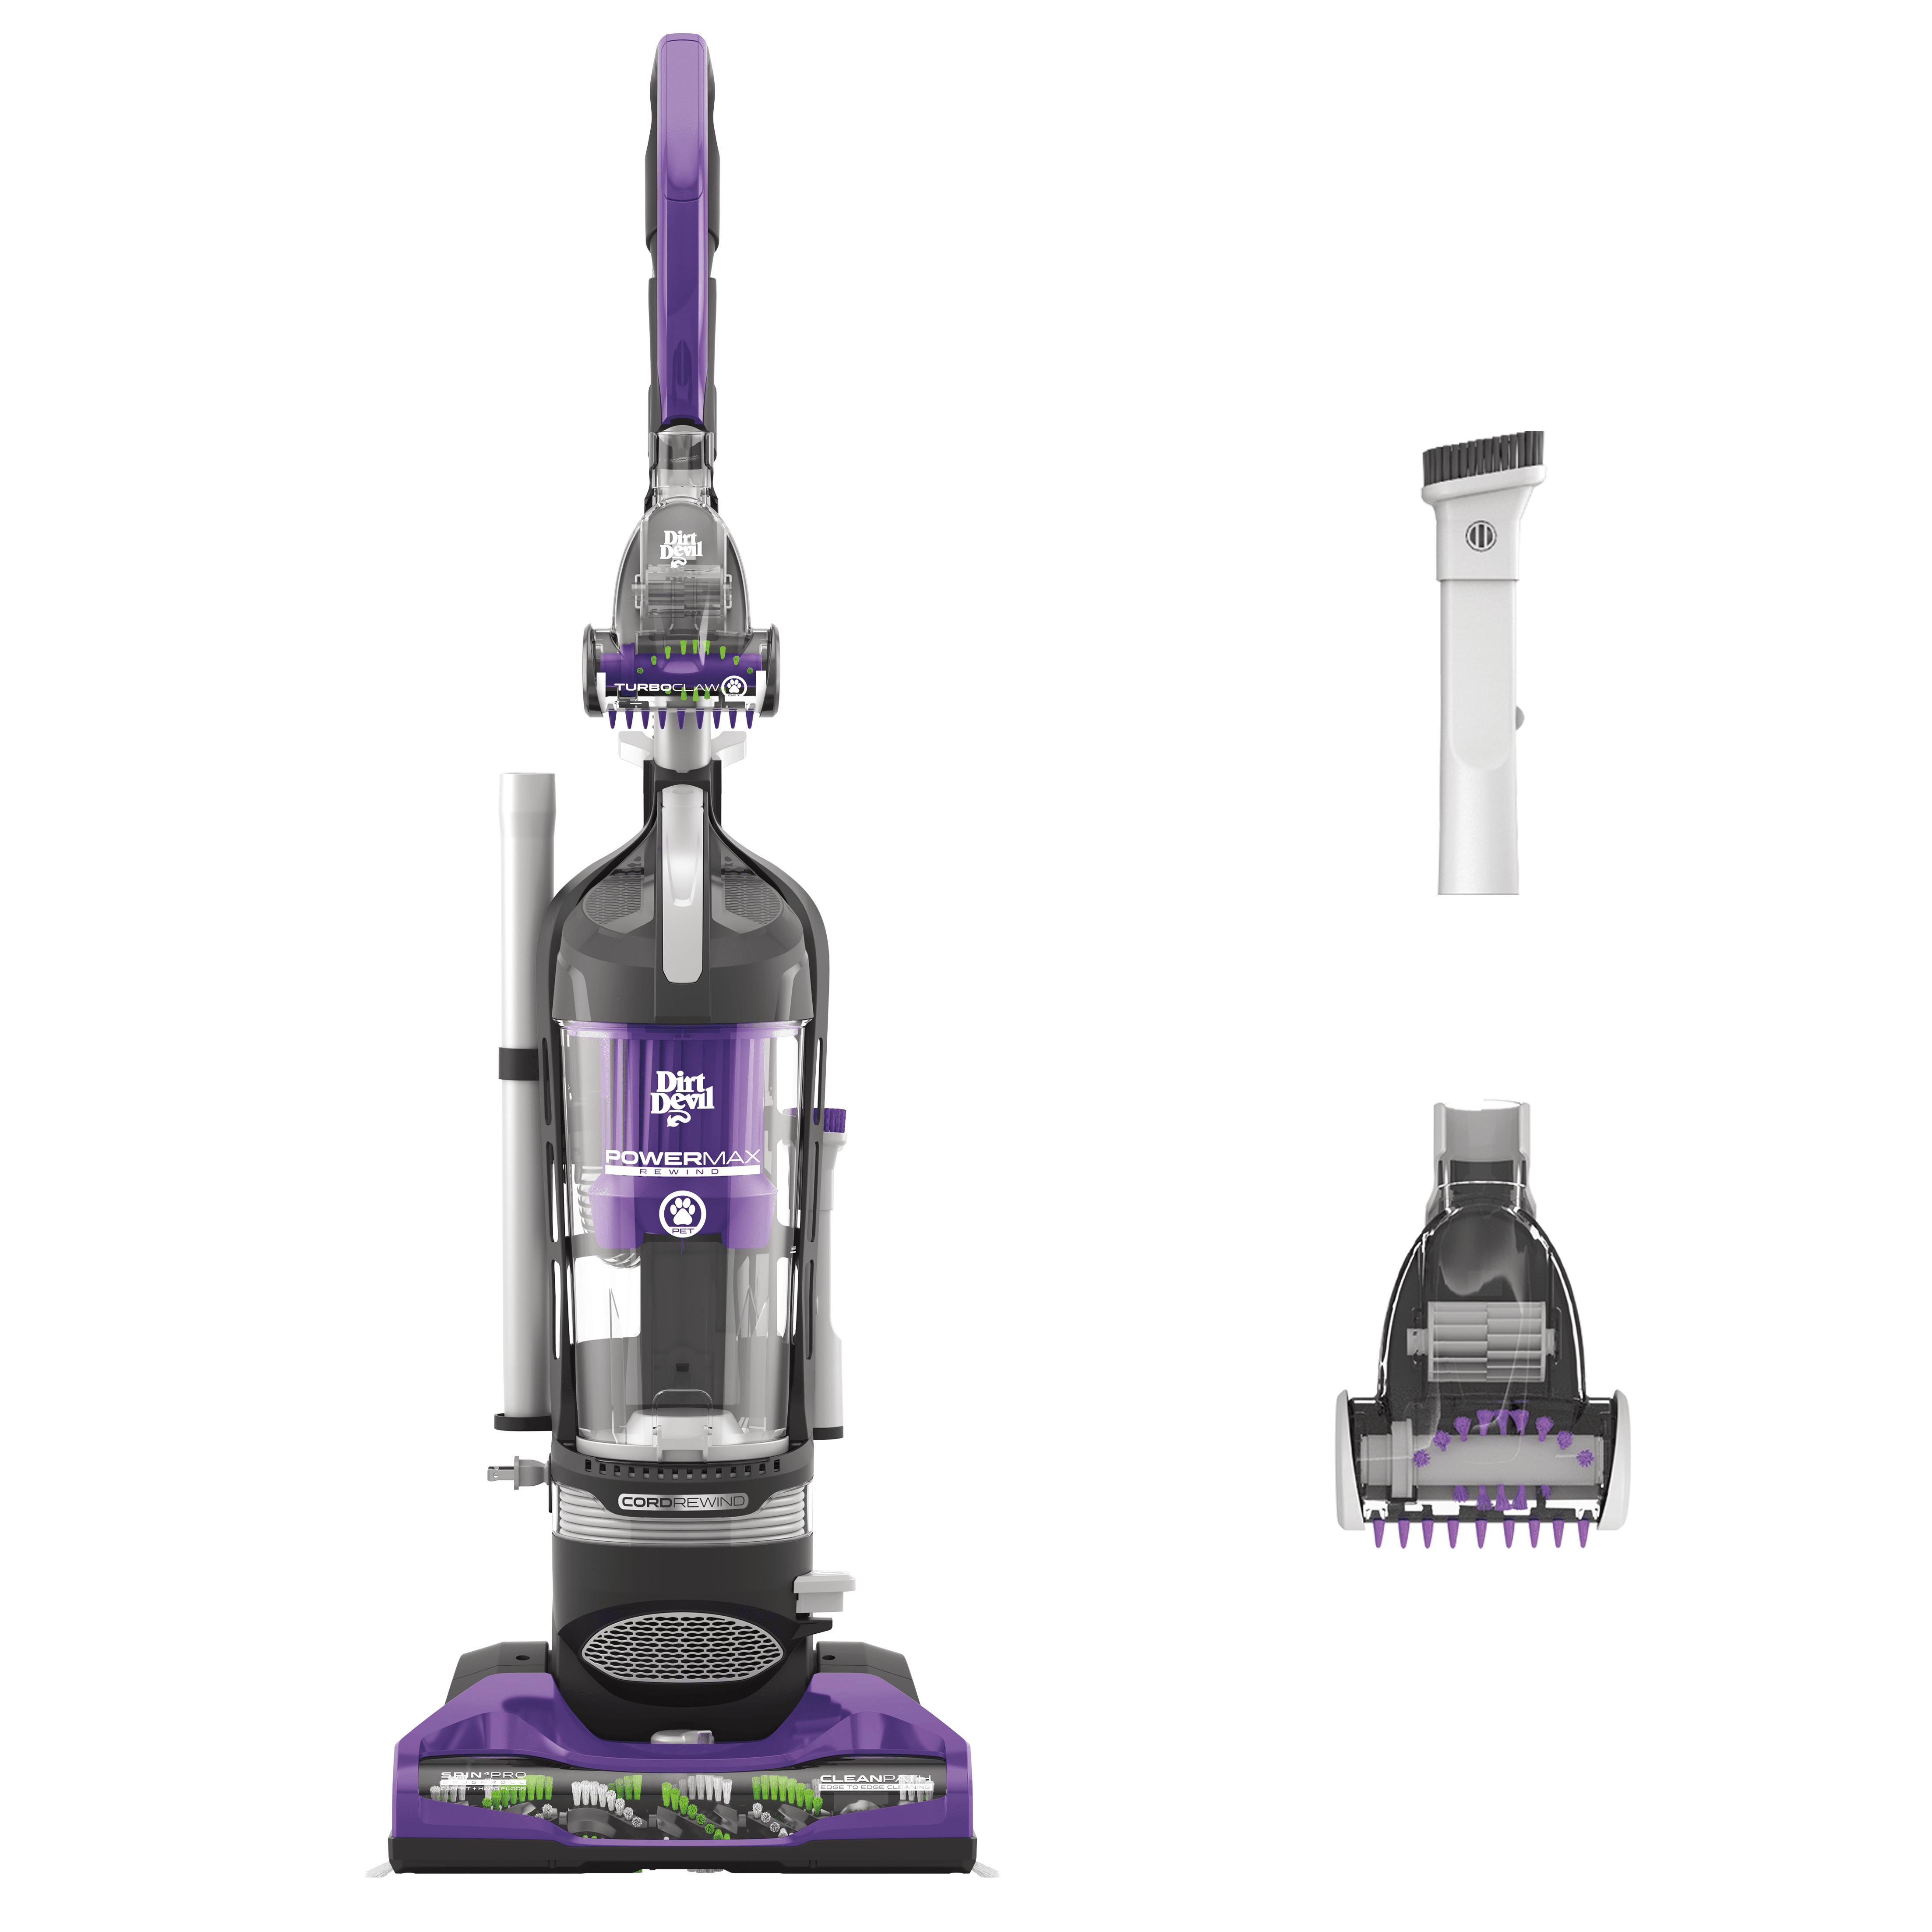 Where to buy the Dirt Devil Power Max Pet Bagless Upright Vacuum Cleaner at the best price?